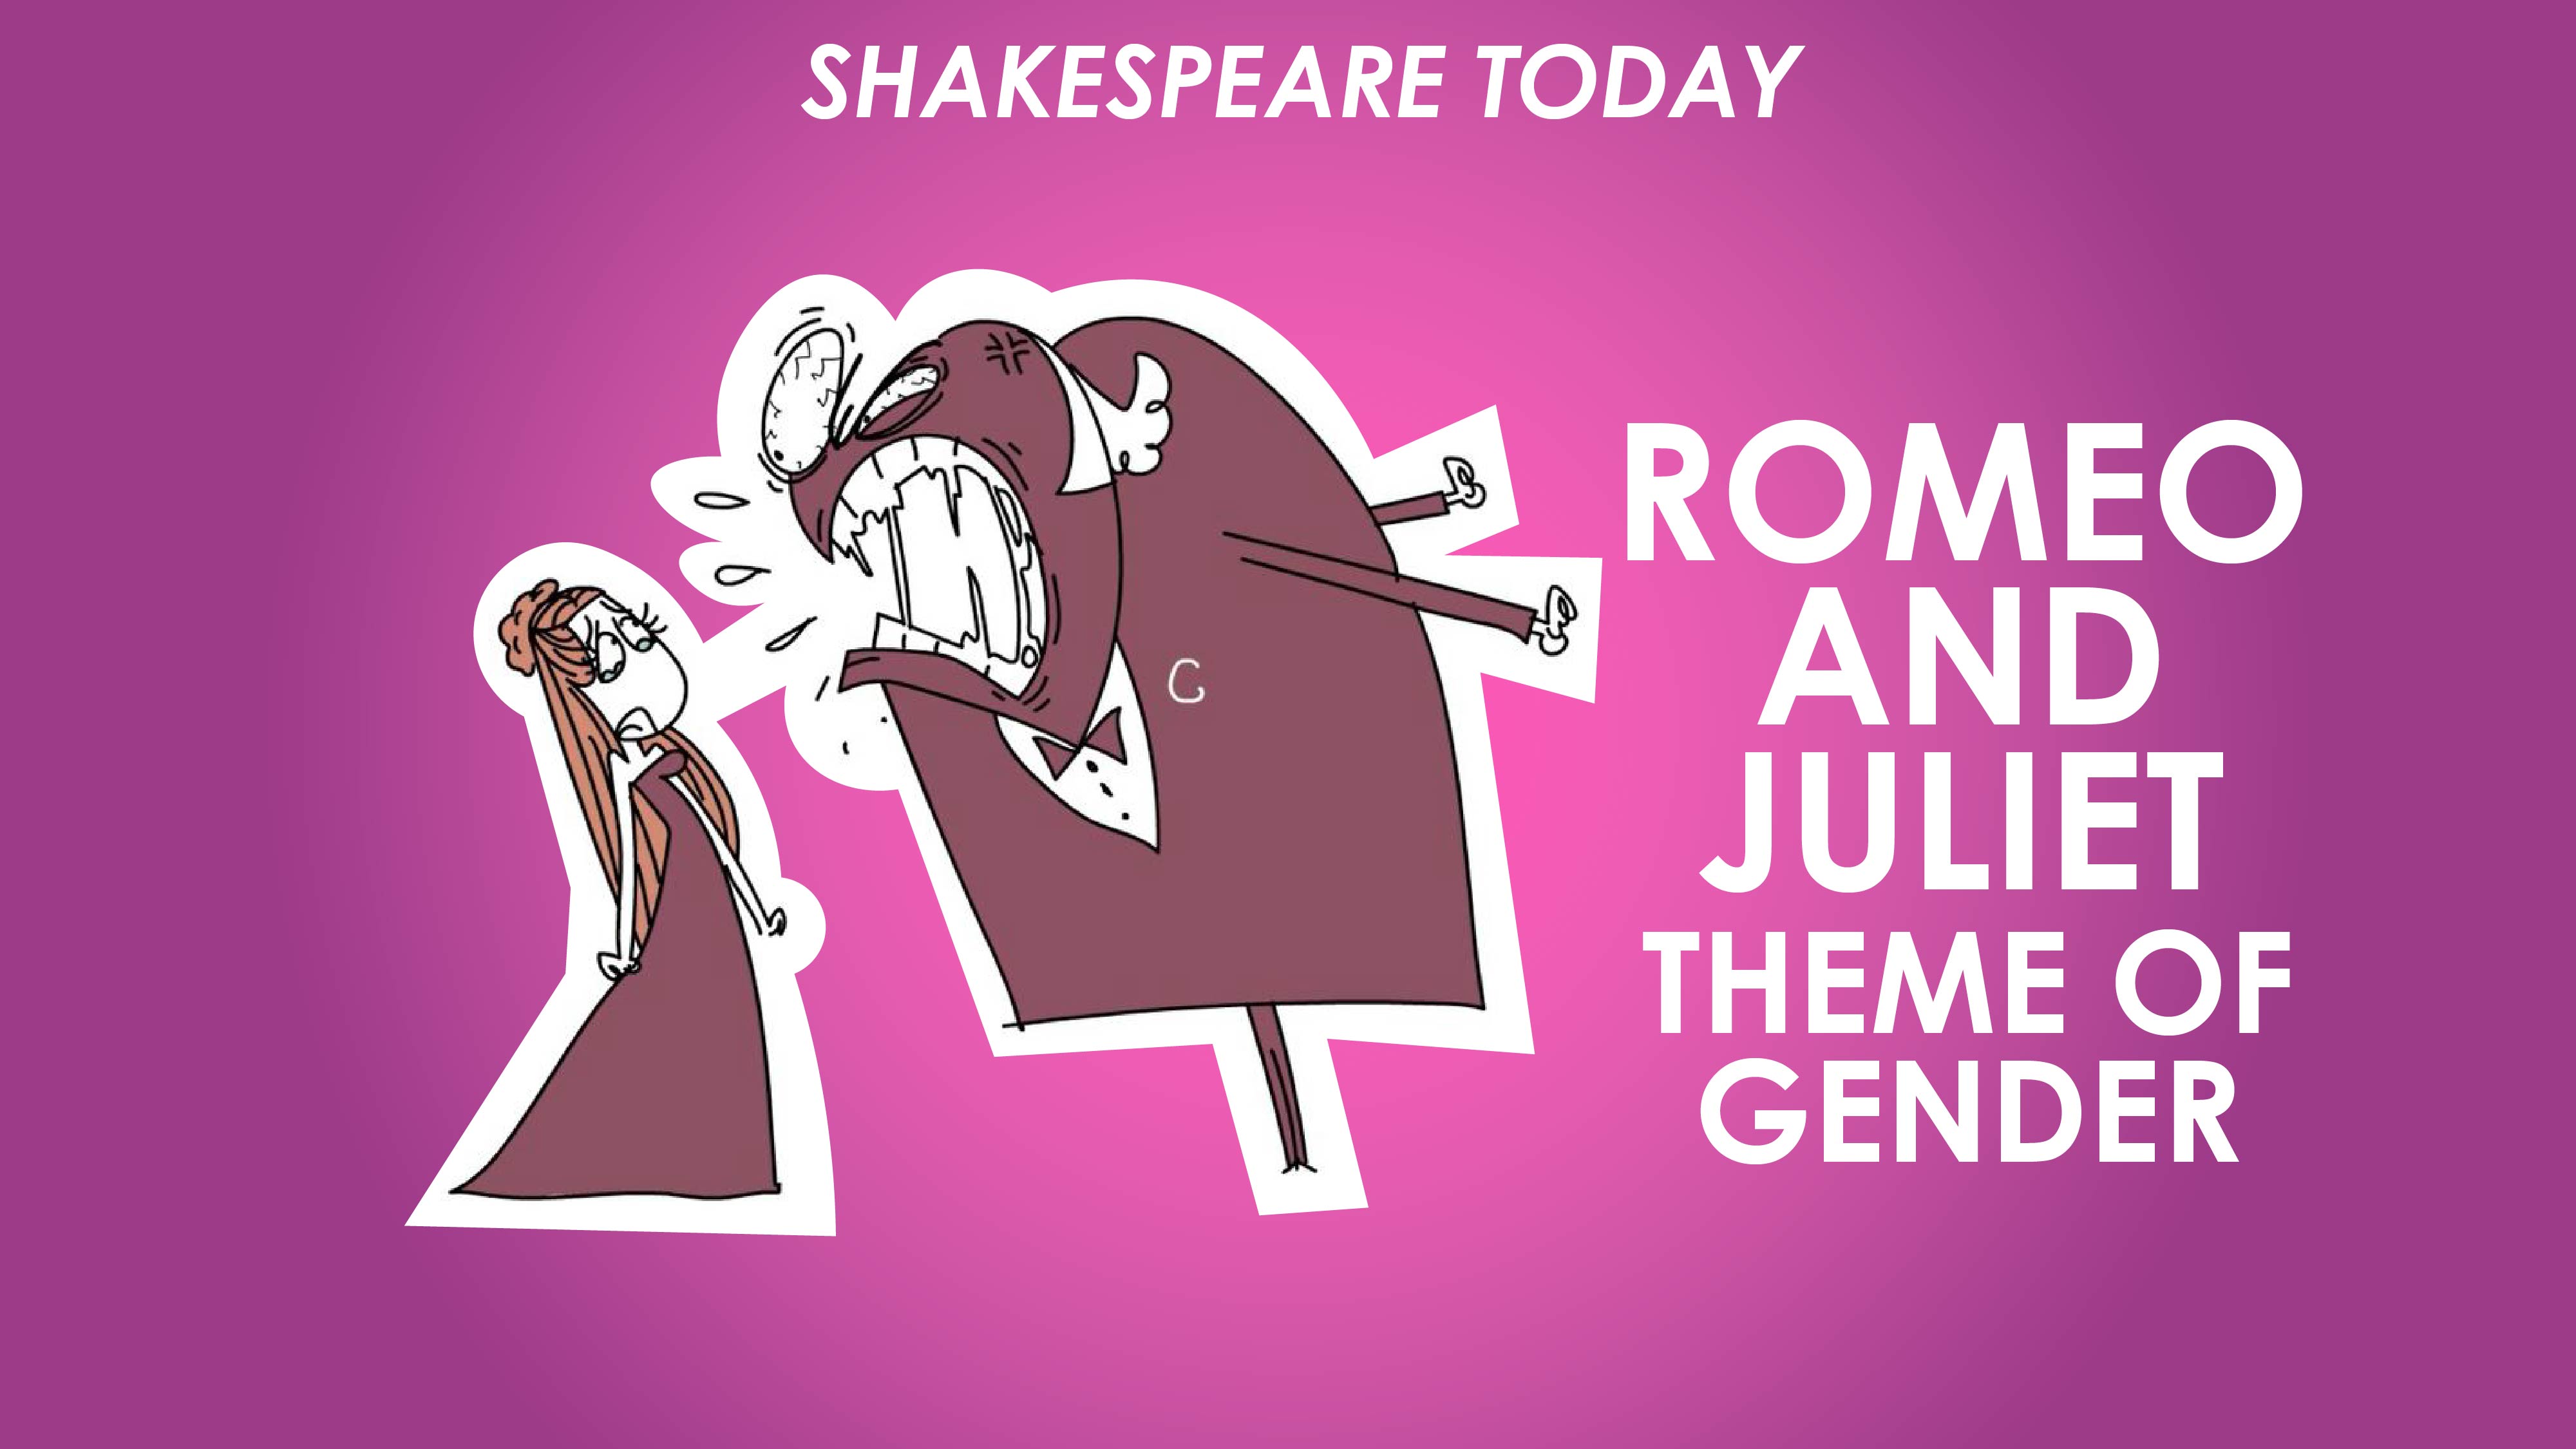 Romeo and Juliet Theme of Gender - Shakespeare Today Series